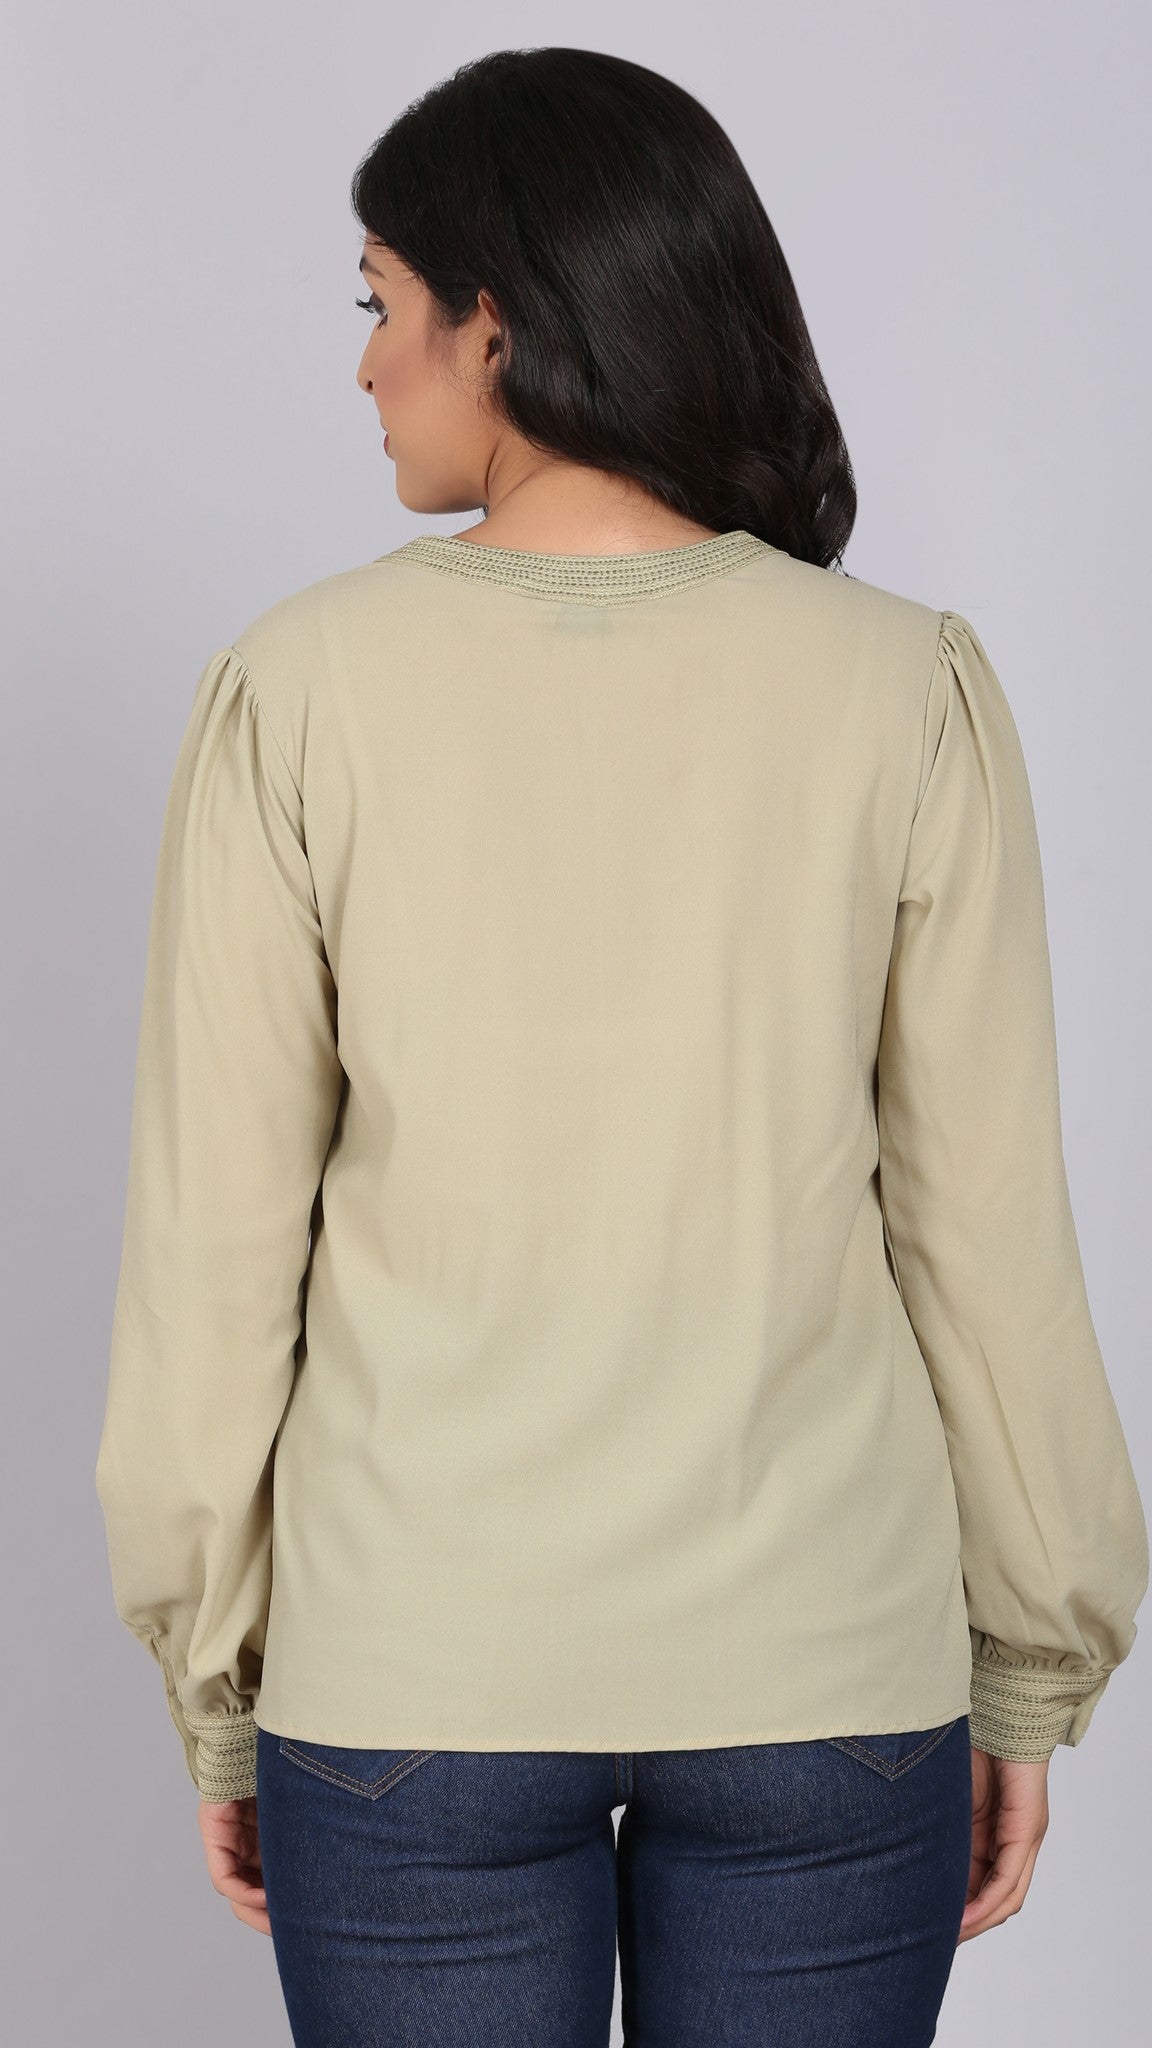 Casual Shirt With Bishop Sleeves